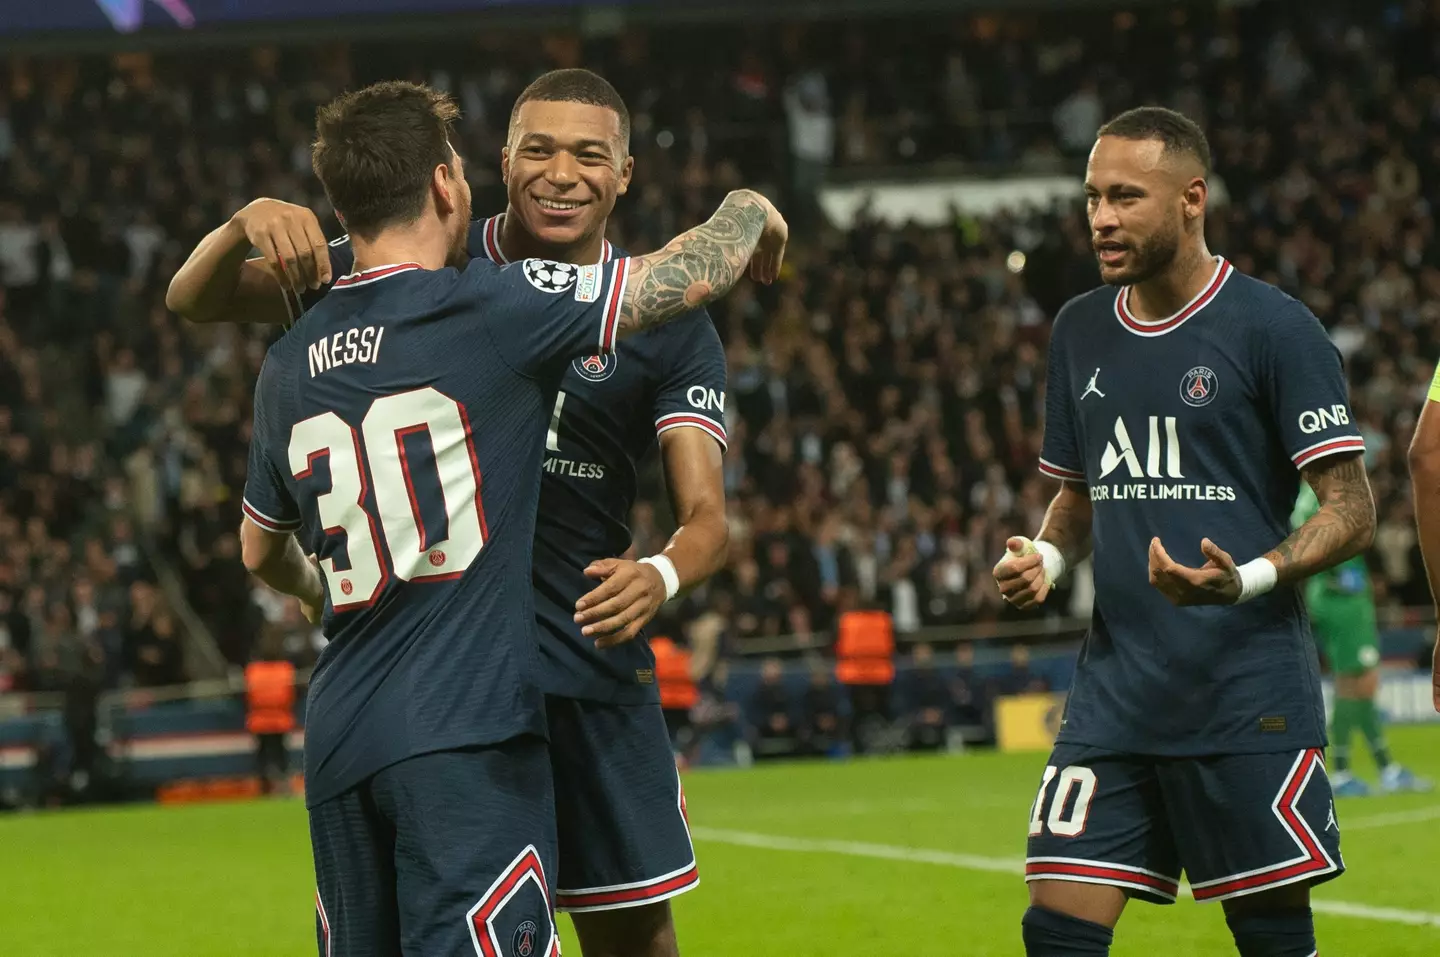 Mbappe, Messi and Neymar celebrate the Argentine's first goal for PSG. Image: PA Images